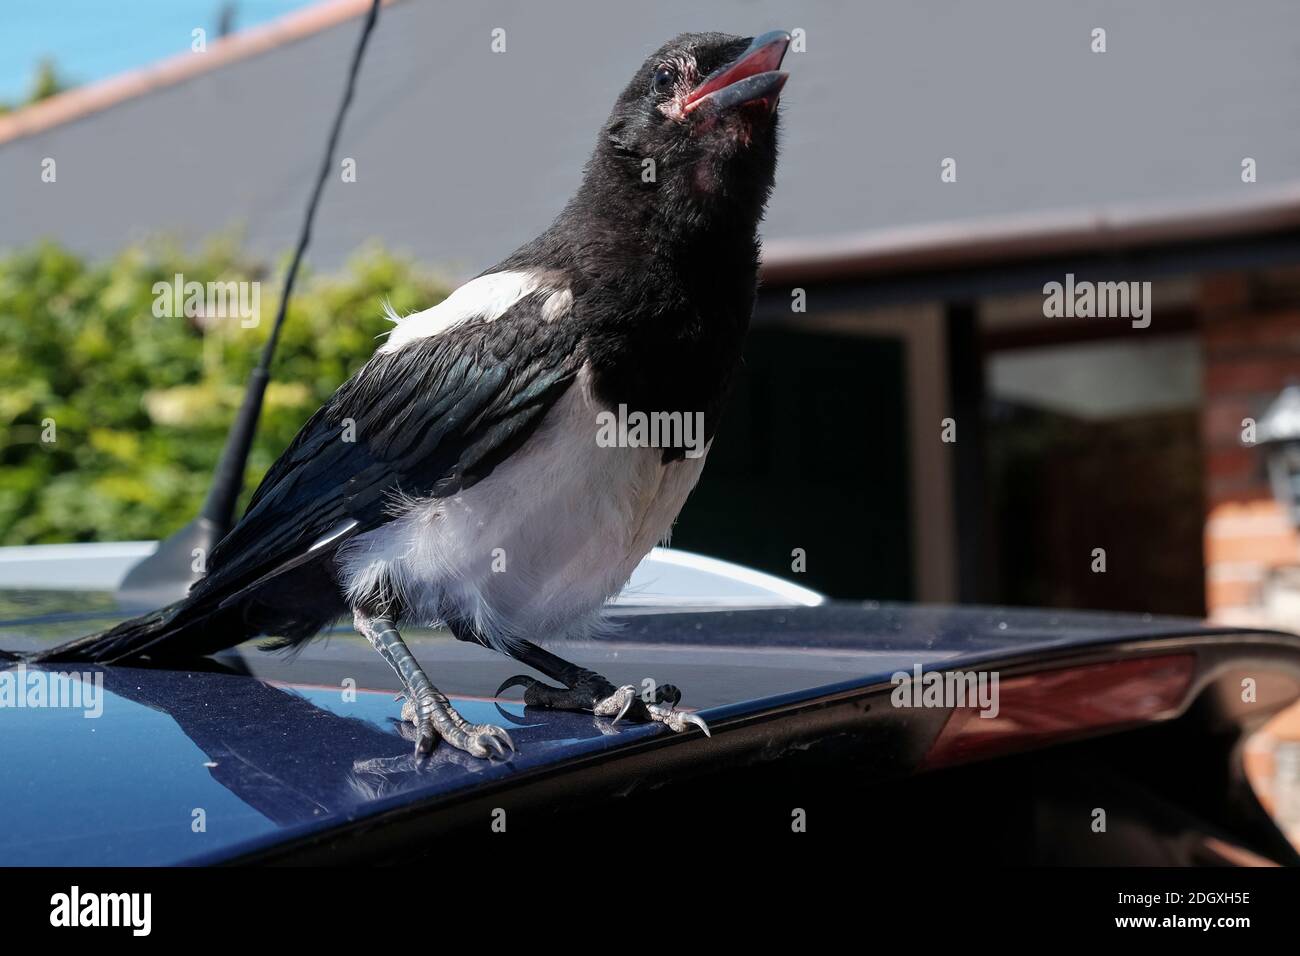 Wide angle Close-up of a young Magpie bird sat on the rear of a car spoiler. Stock Photo